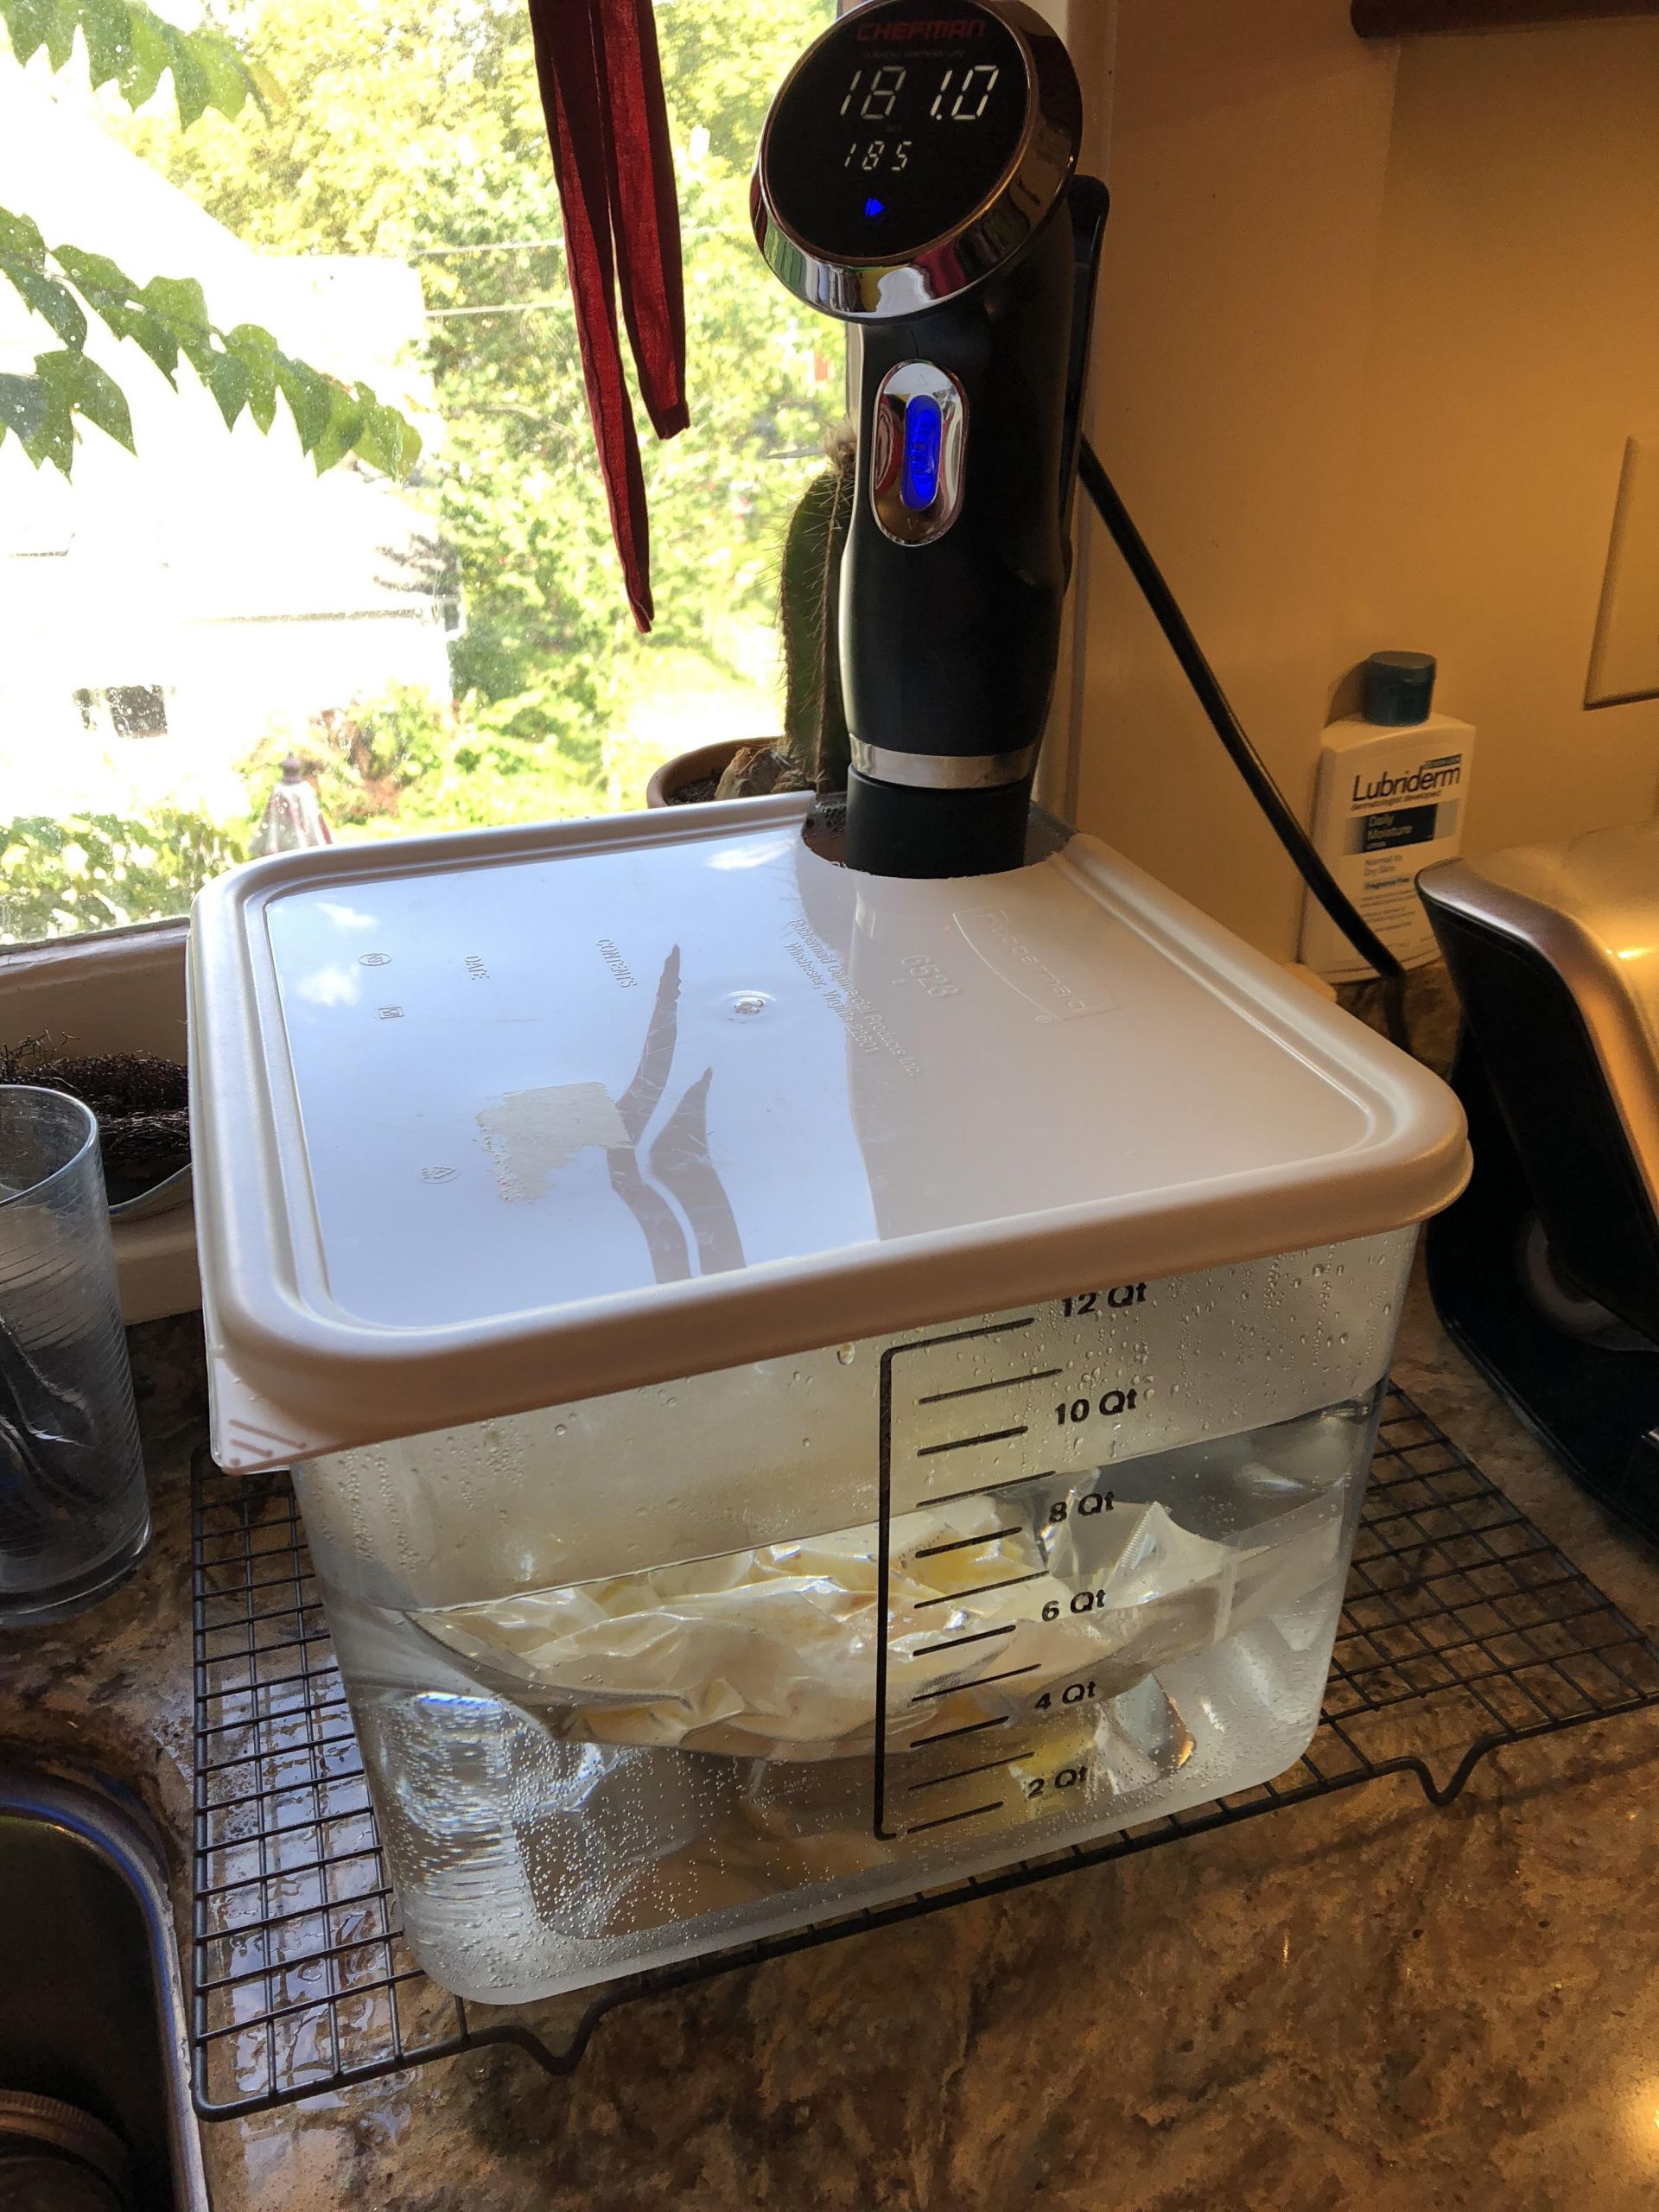 Sous Vide Everything Mashed Potatoes
 First try at Sous Vide Everything mashed potatoes sousvide